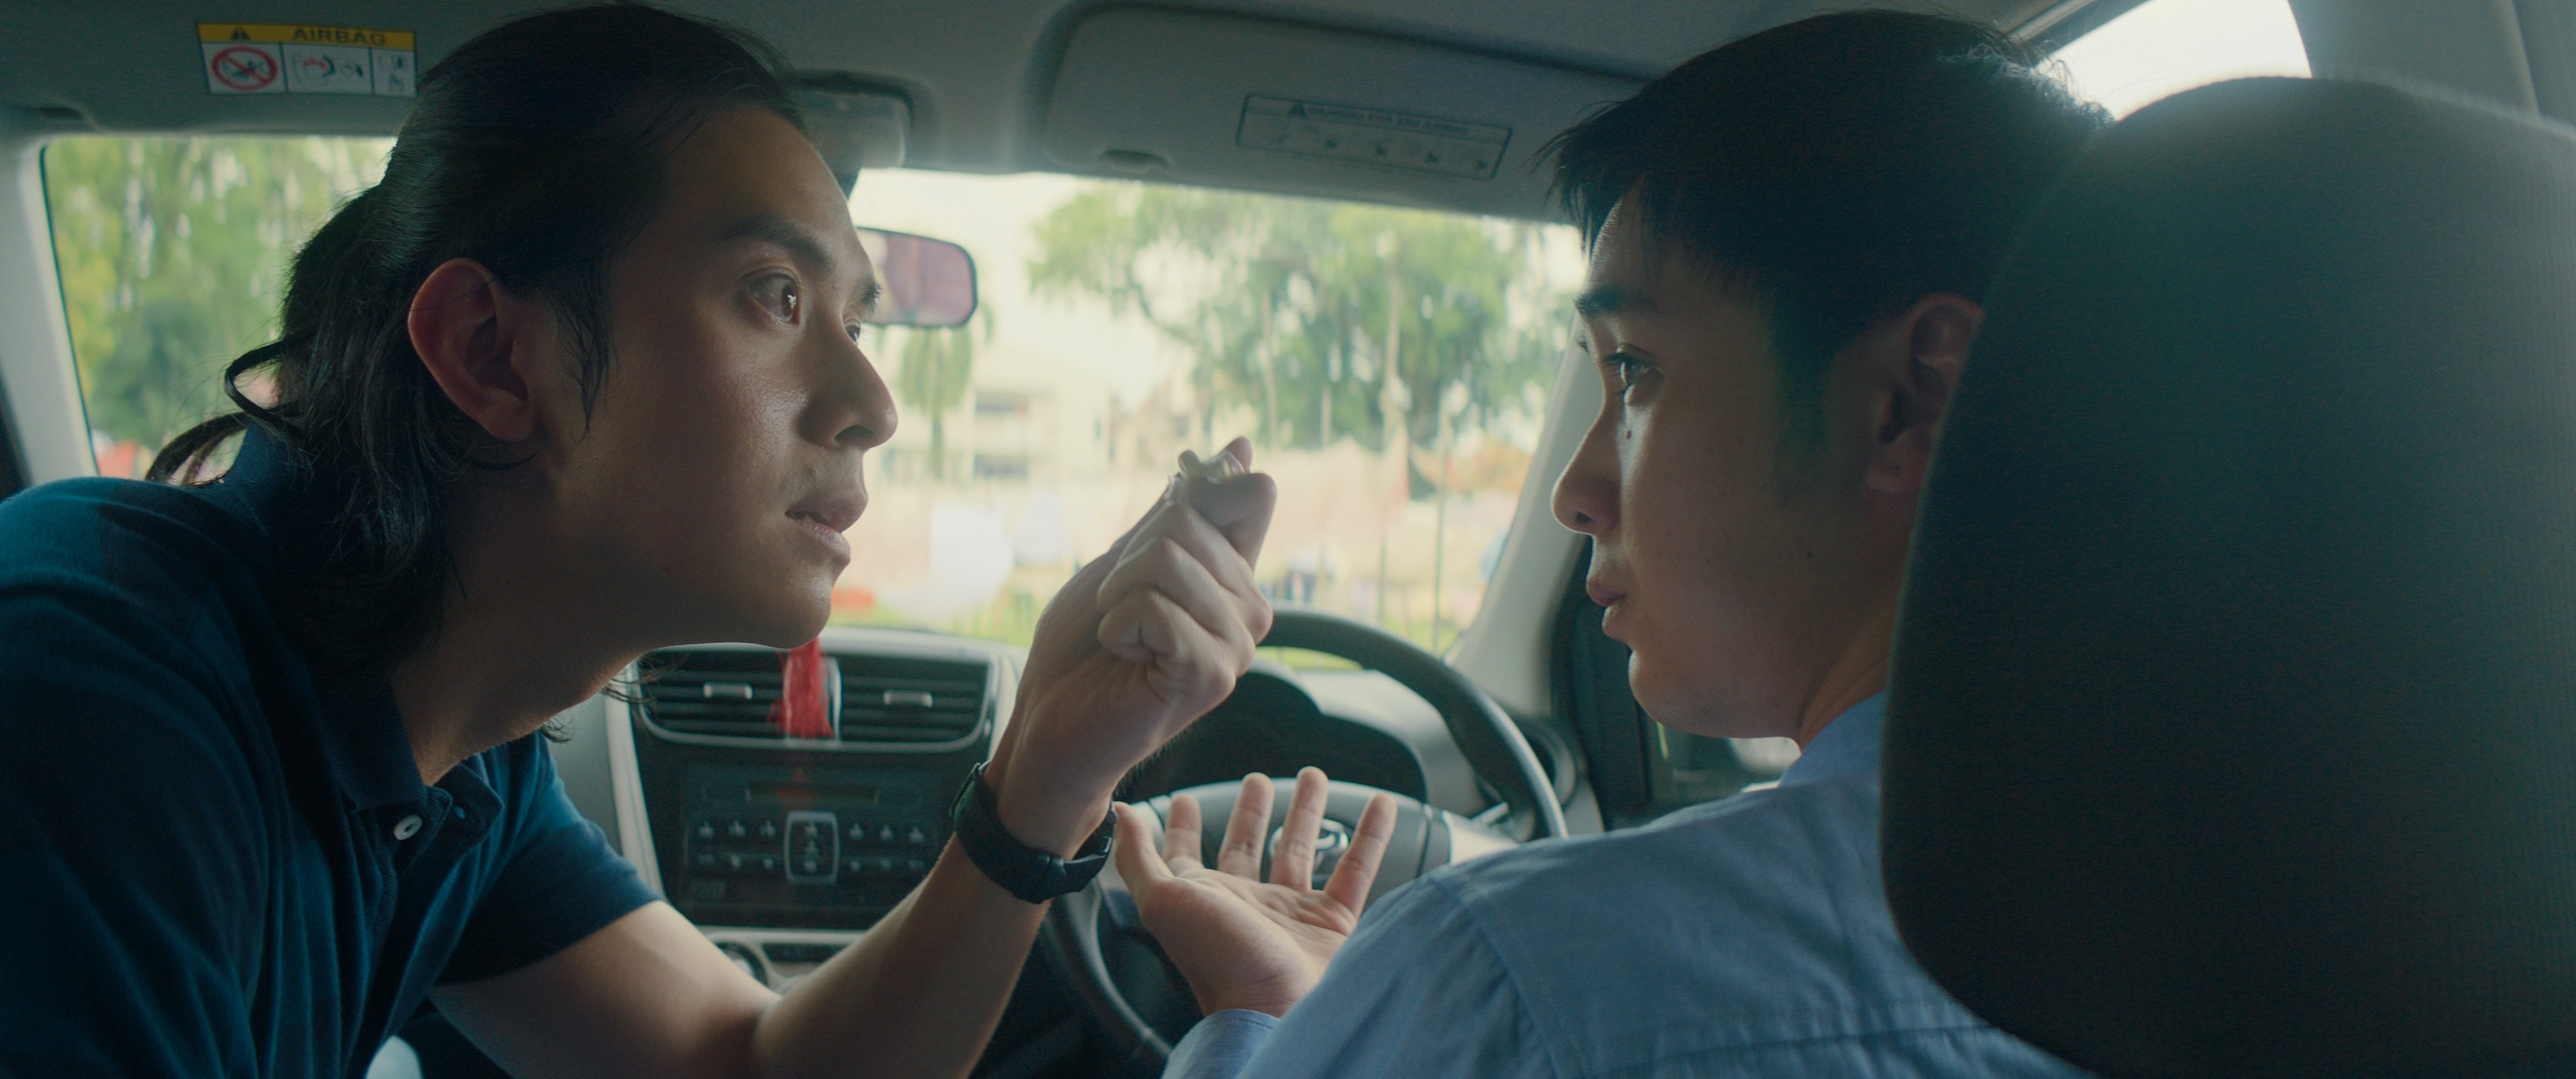 Wilson Lee (left) and Fabian Loo in a still from “Rain Town”. Photo: Current Pictures